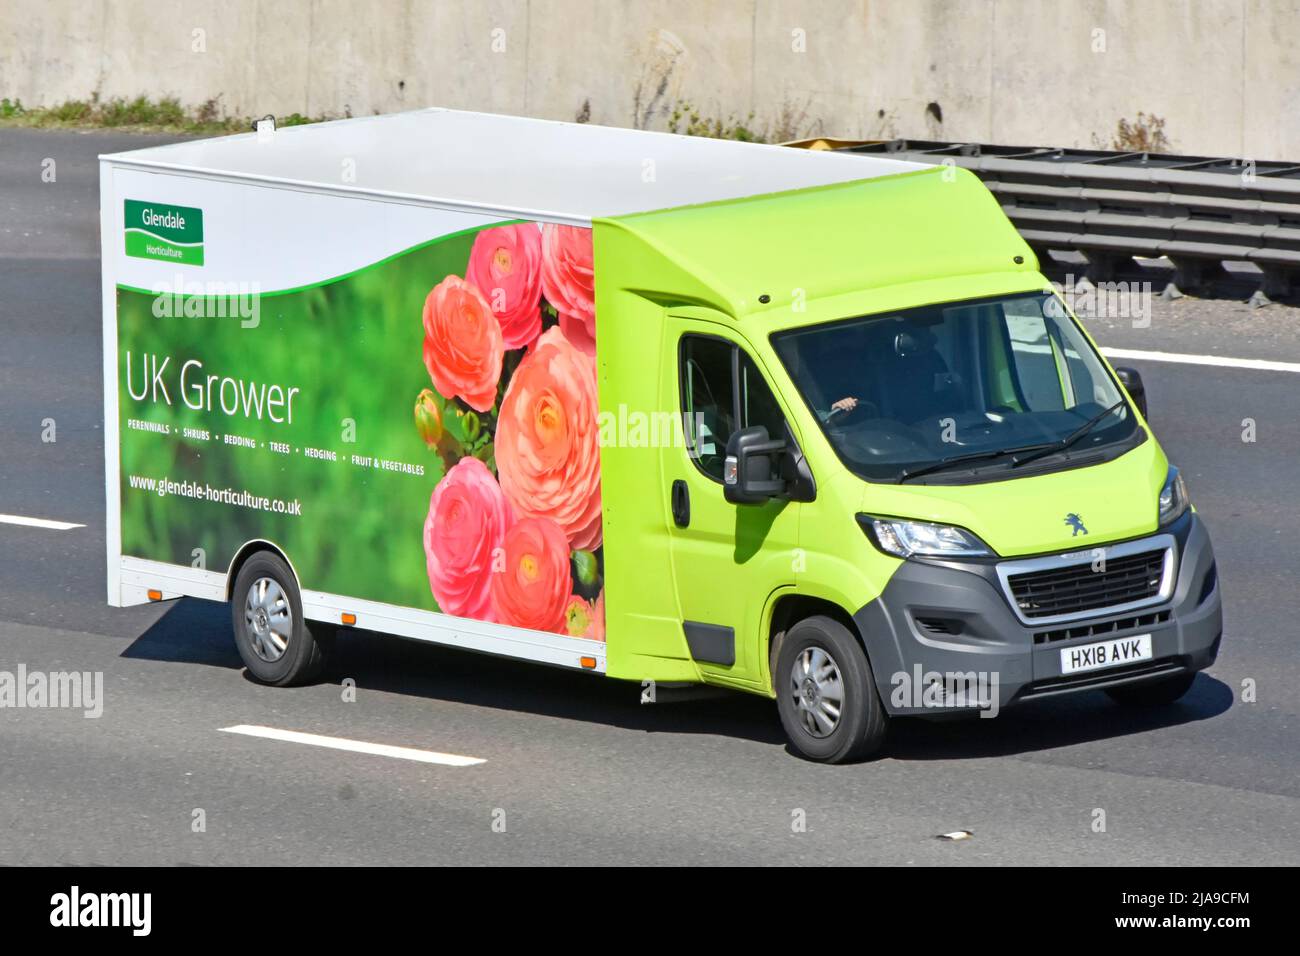 Glendale Horticulture a UK plant production grower business side & front view Peugeot delivery van & driver travelling on English UK motorway road Stock Photo